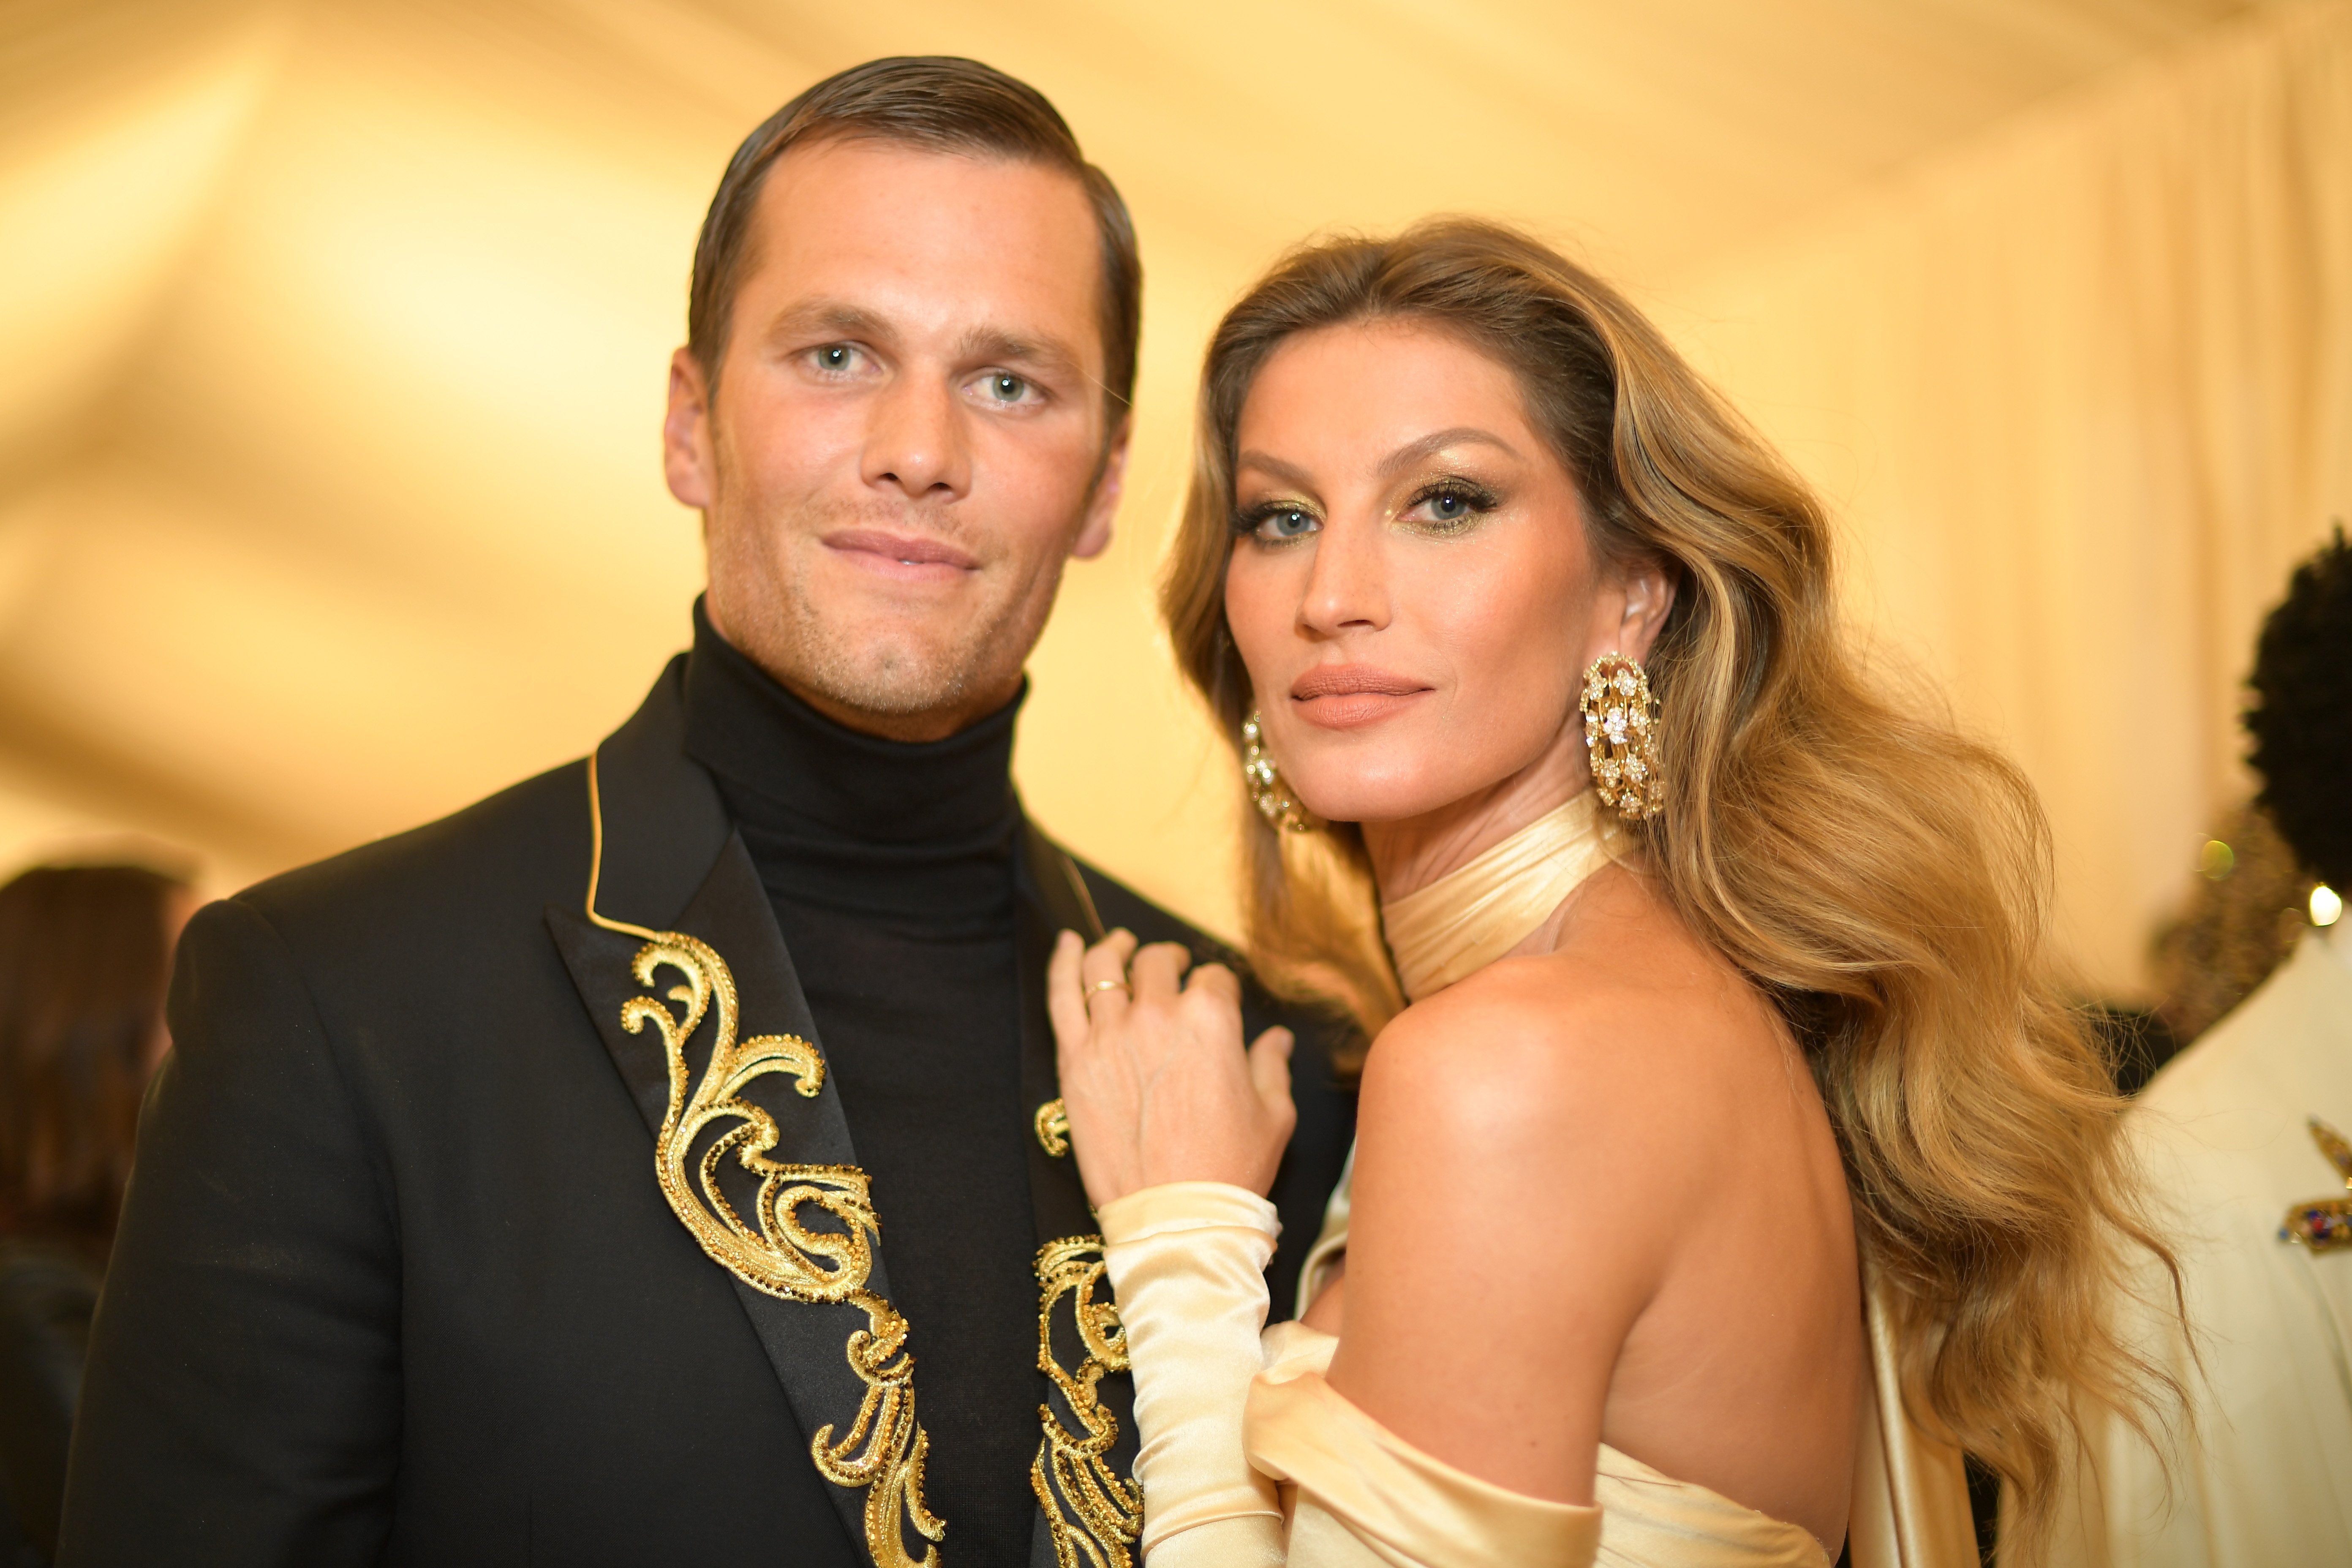 Tom Brady and Gisele Bundchen attend the Heavenly Bodies: Fashion & The Catholic Imagination Costume Institute Gala at The Metropolitan Museum of Art on May 7, 2018 in New York City | Photo: Getty Images